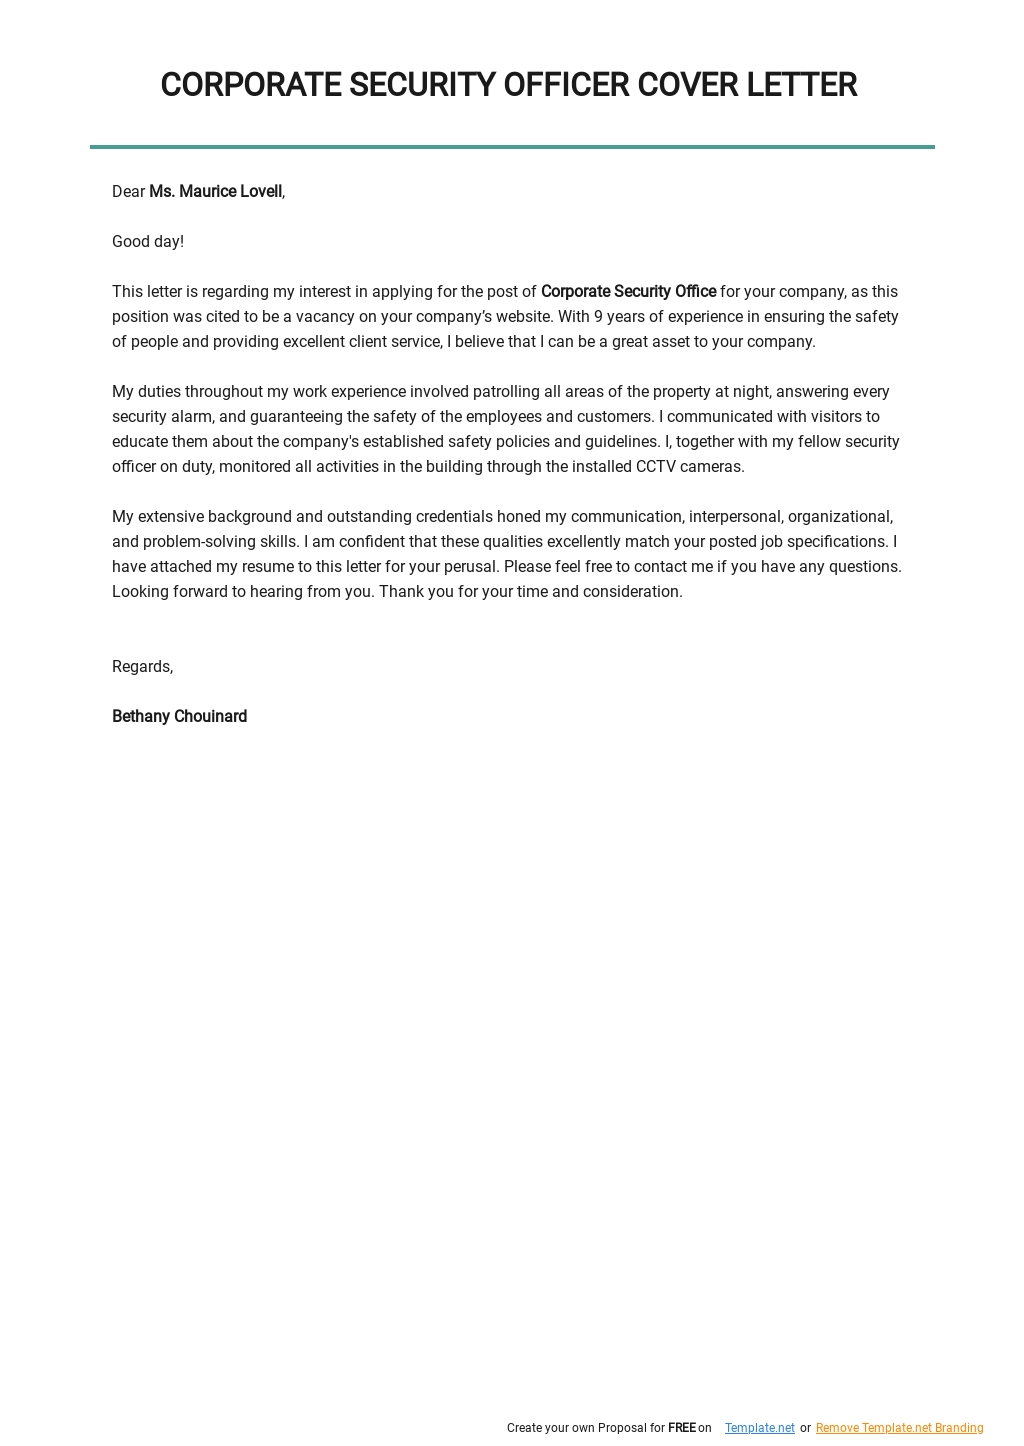 Corporate Security Officer Cover Letter Template.jpe